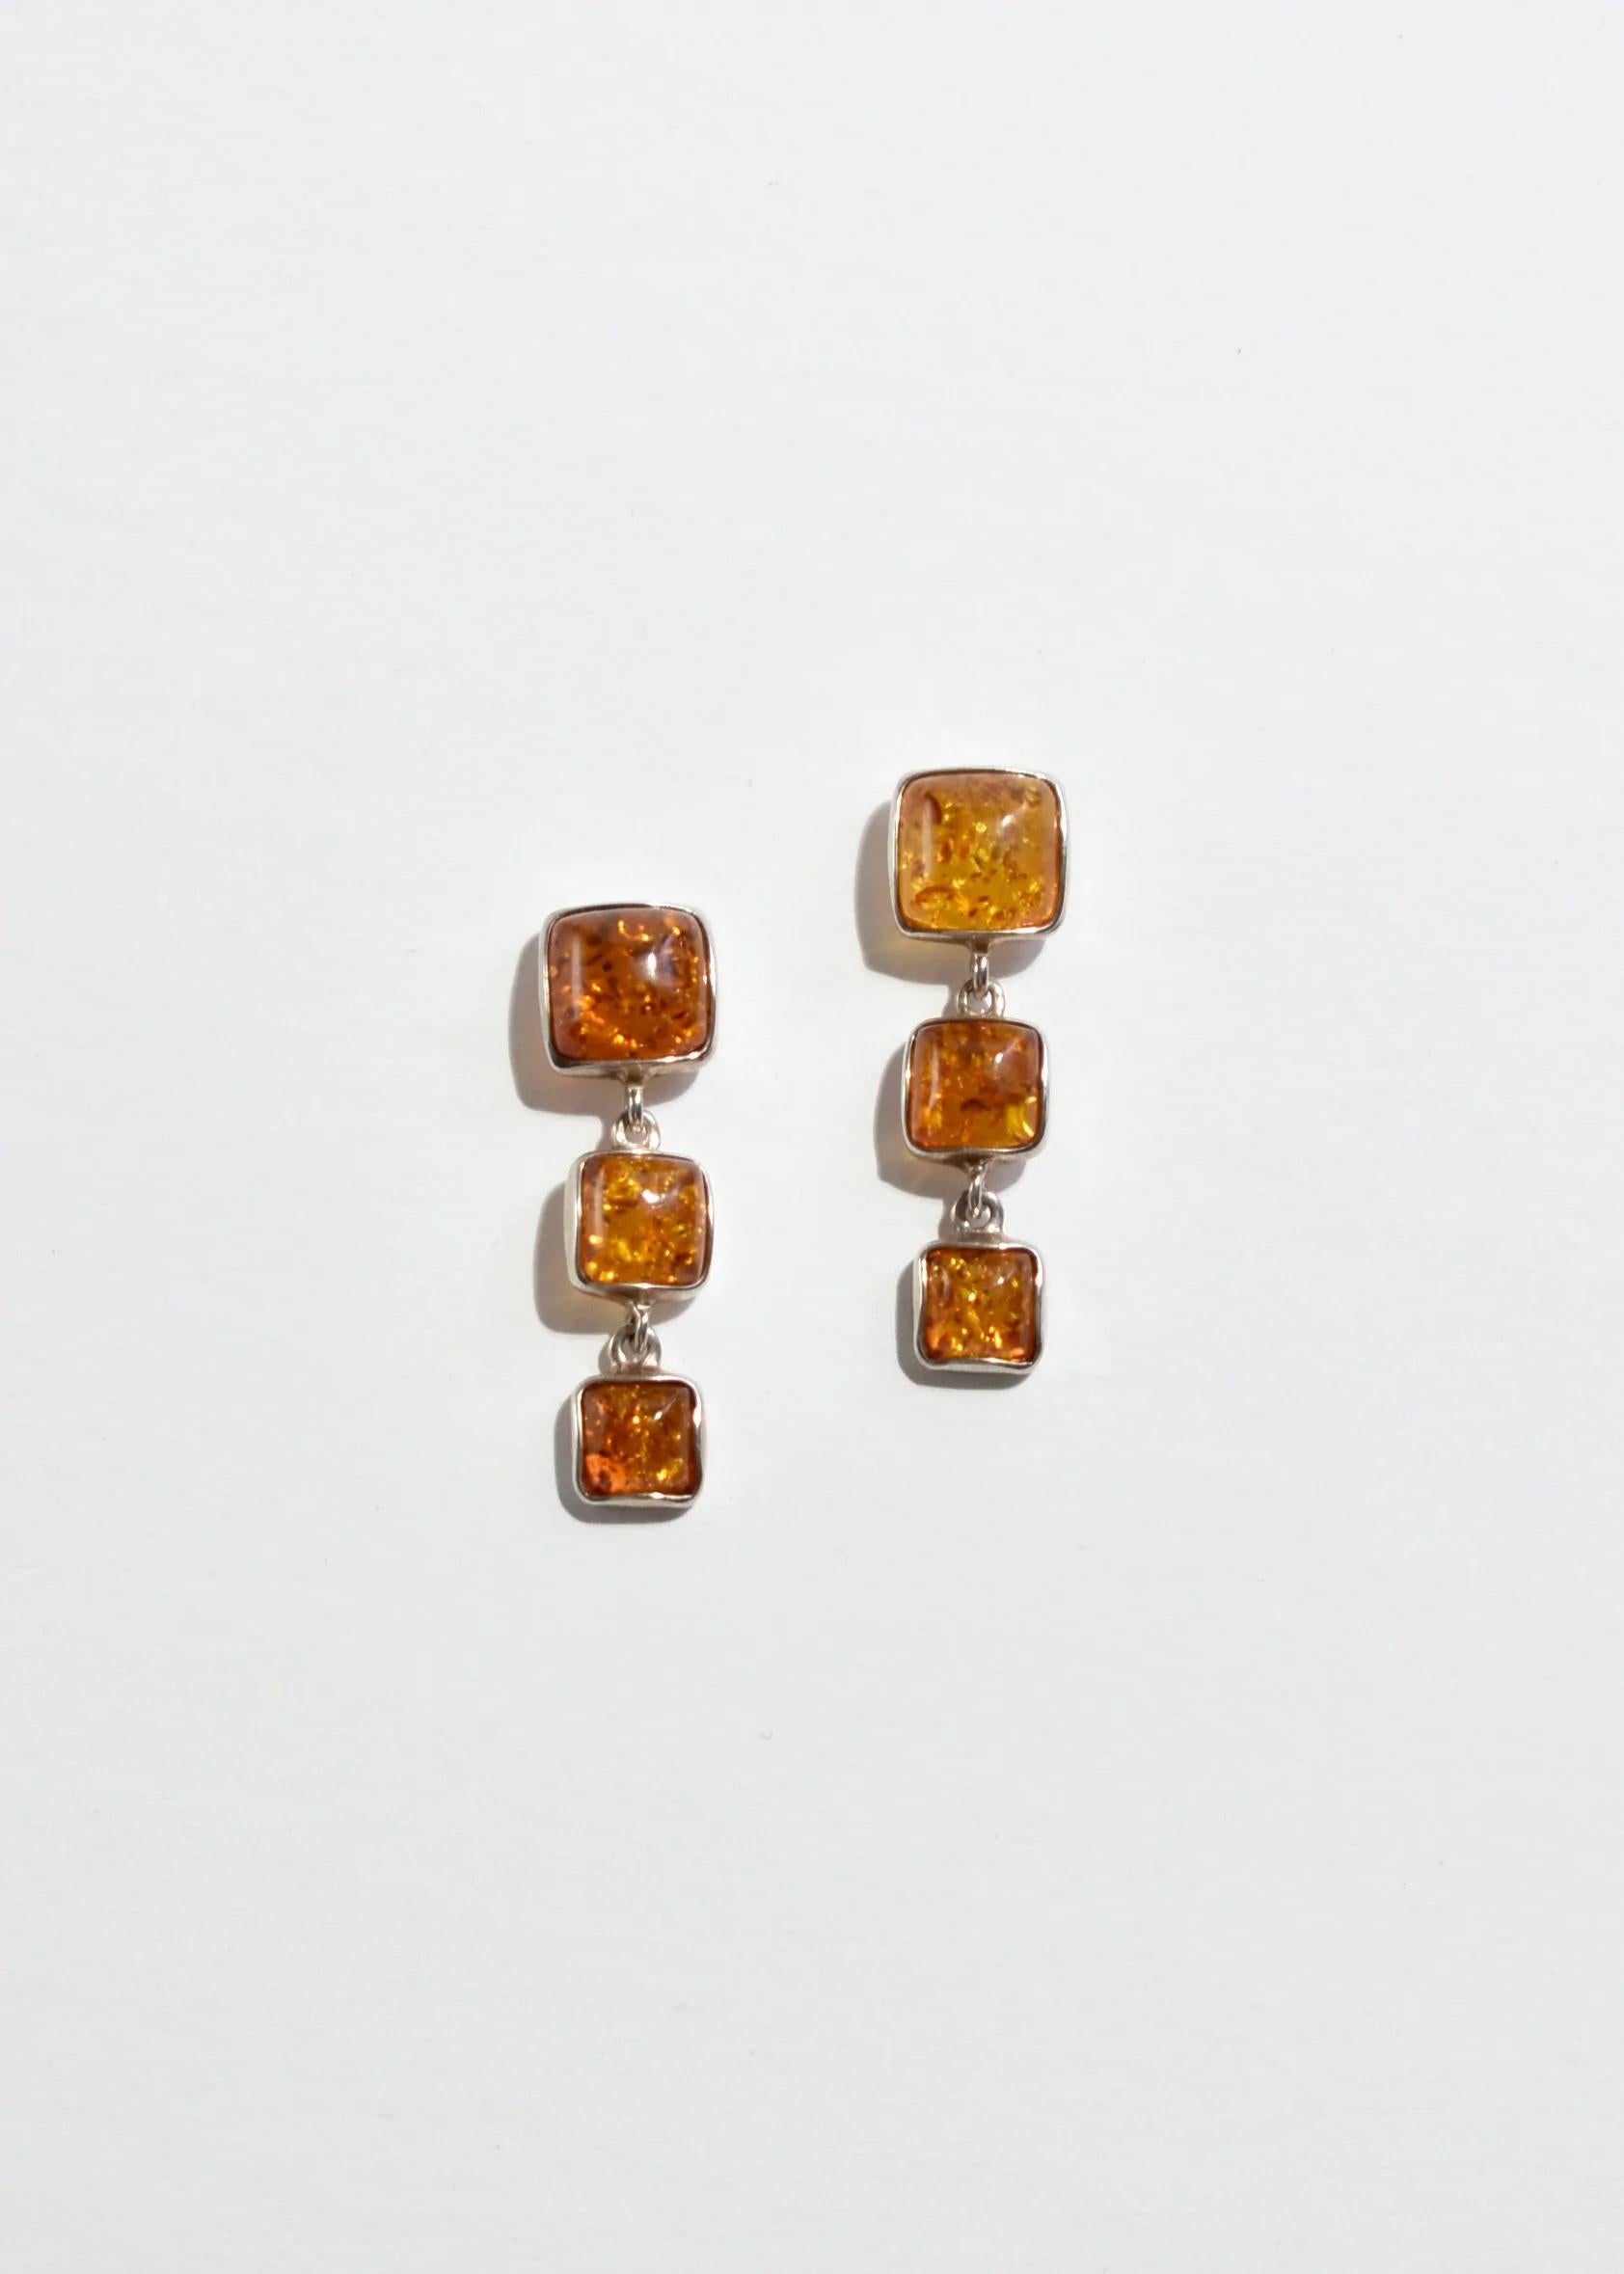 Stunning vintage amber earrings with square shapes and a drop detail, pierced.

Material: Sterling silver, amber. 